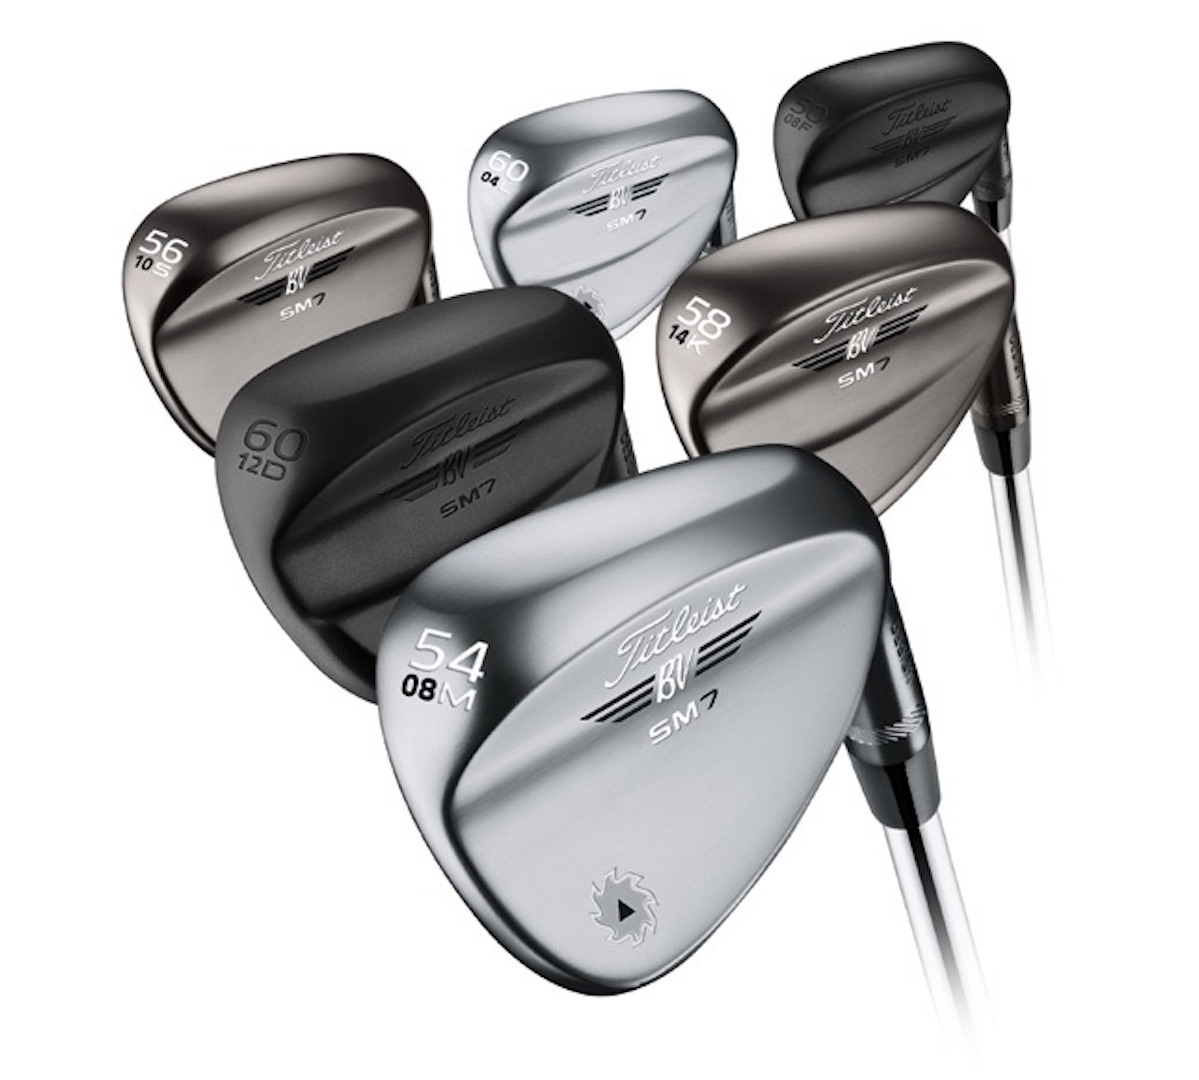 Titleist Vokey SM7 Wedges launch this March | Golf Retailing